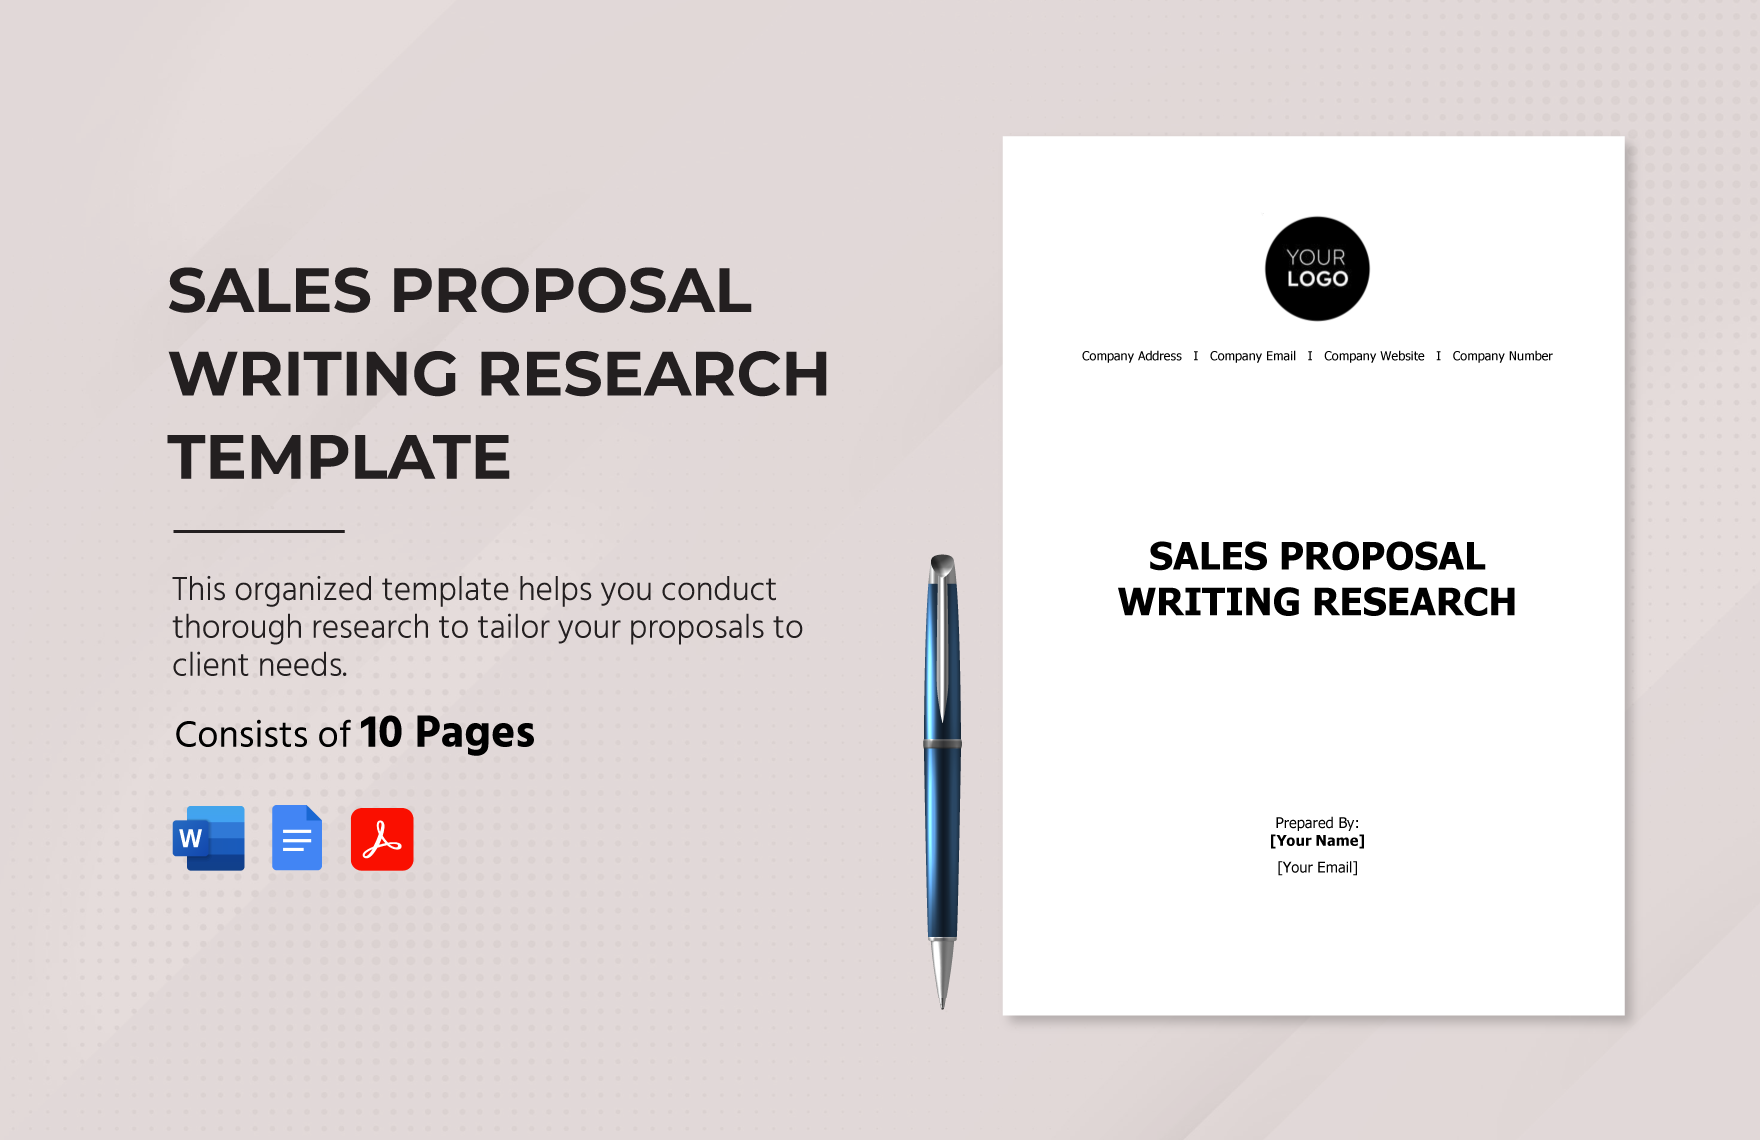 Sales Proposal Writing Research Template